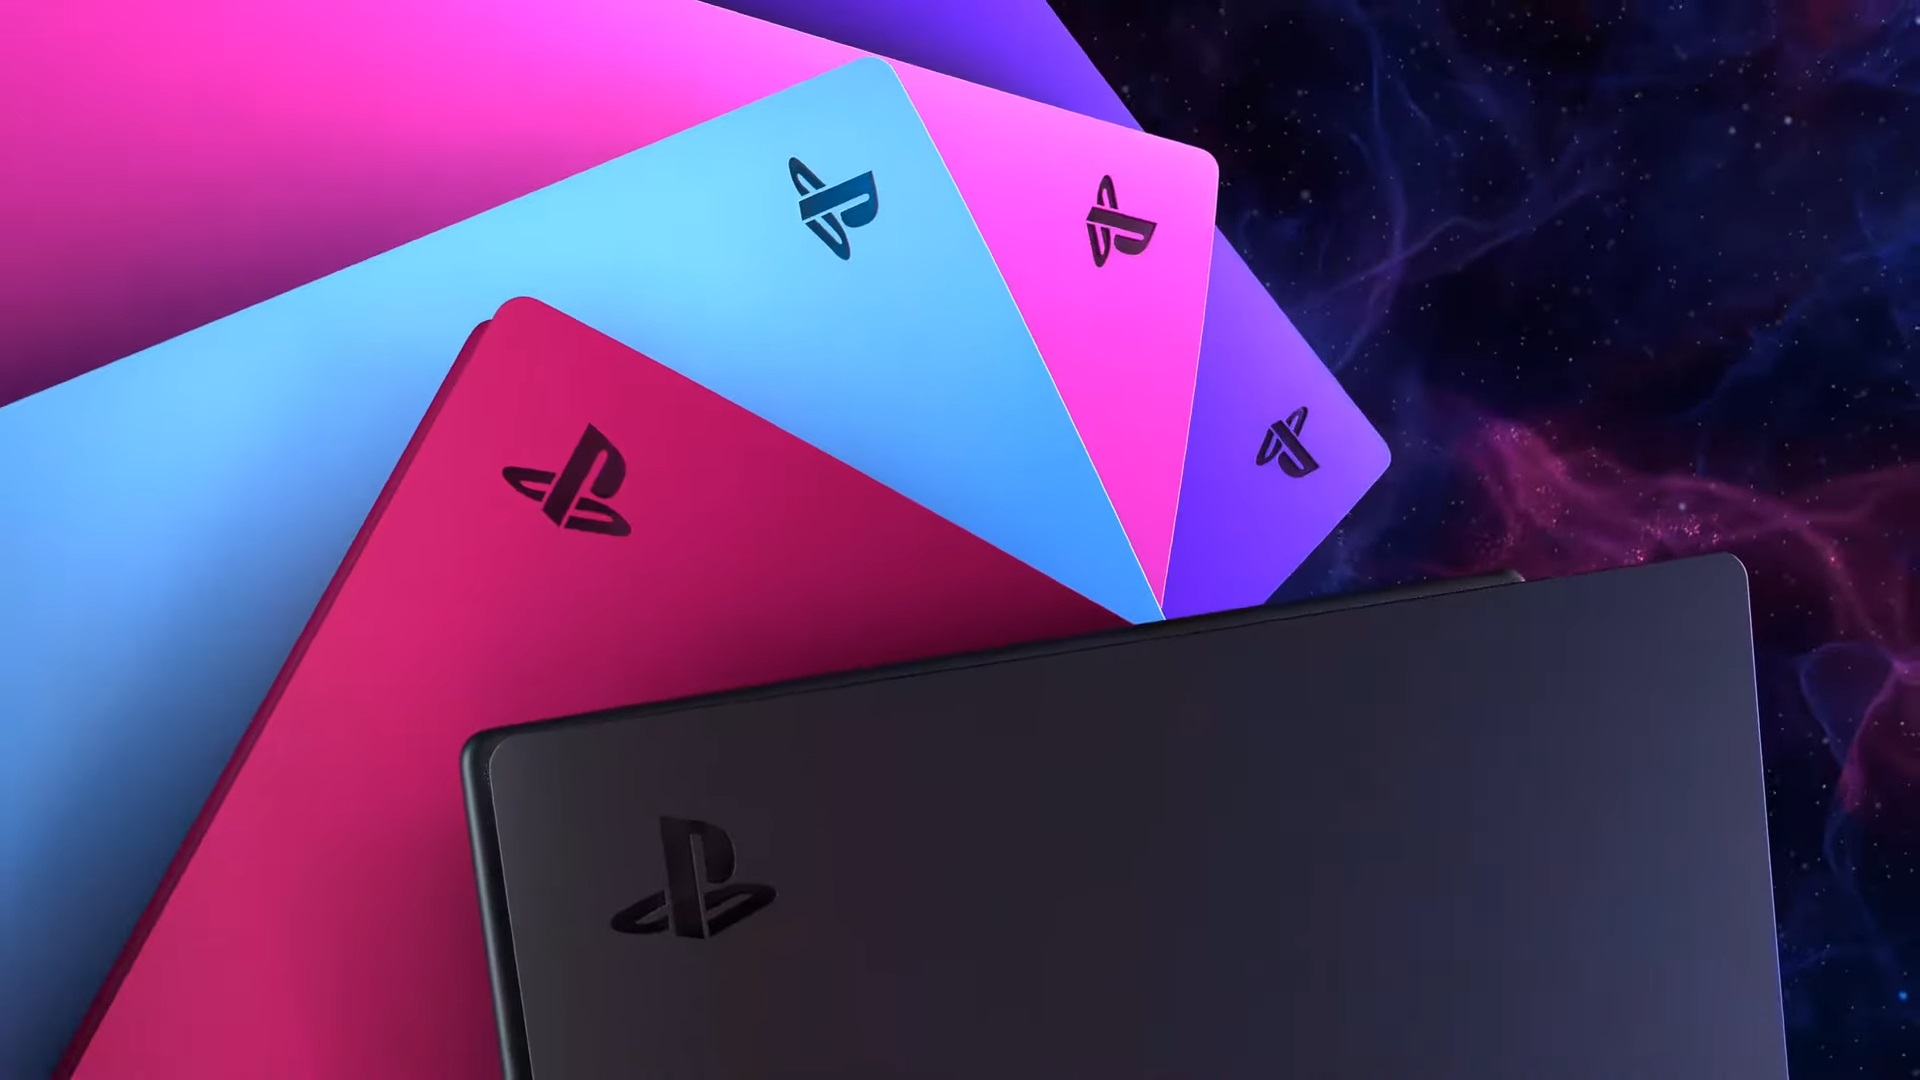 Leaked PlayStation 5 Pro Specs Tease Exciting Developments by September  2024 - Gizmochina